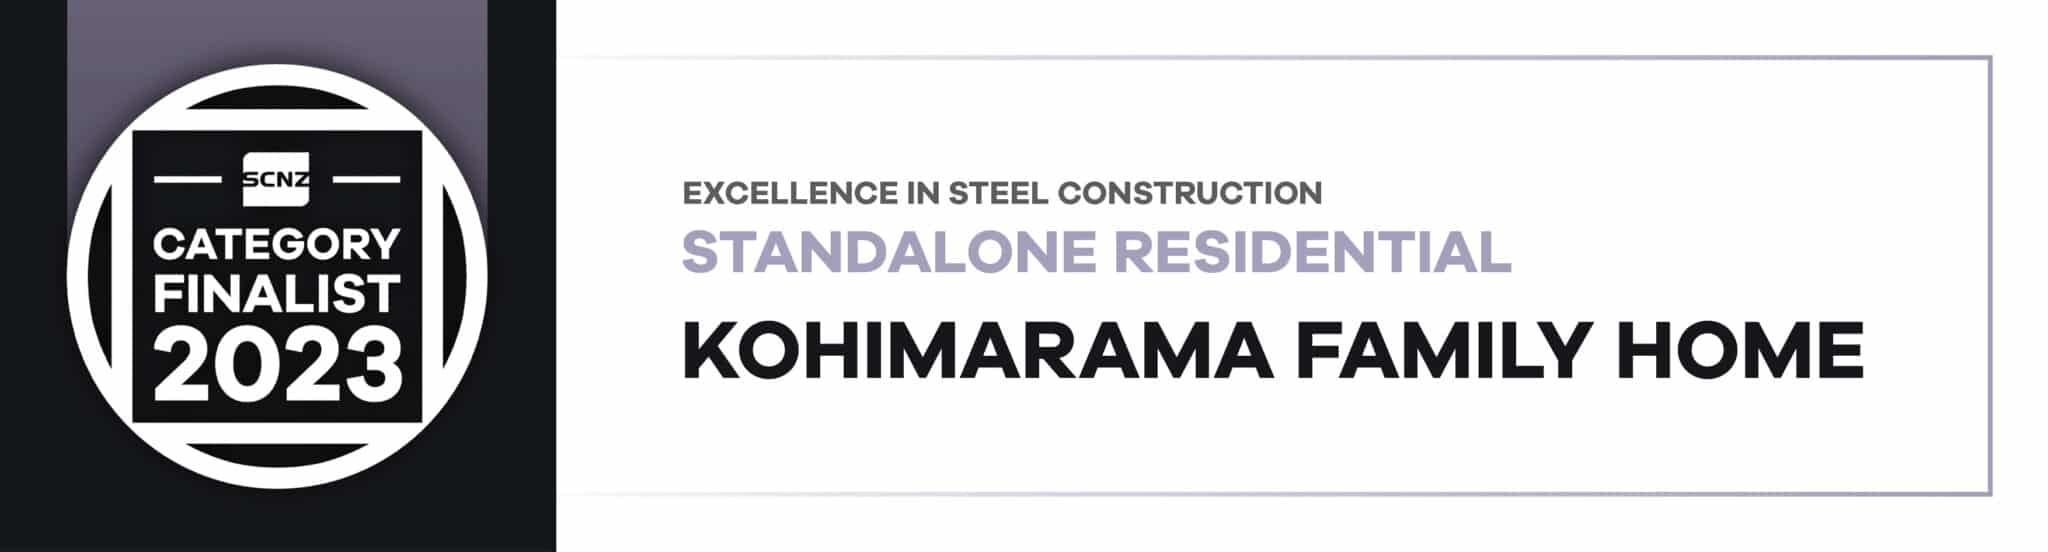 Excellence in Steel Construction award - category finalist 2023